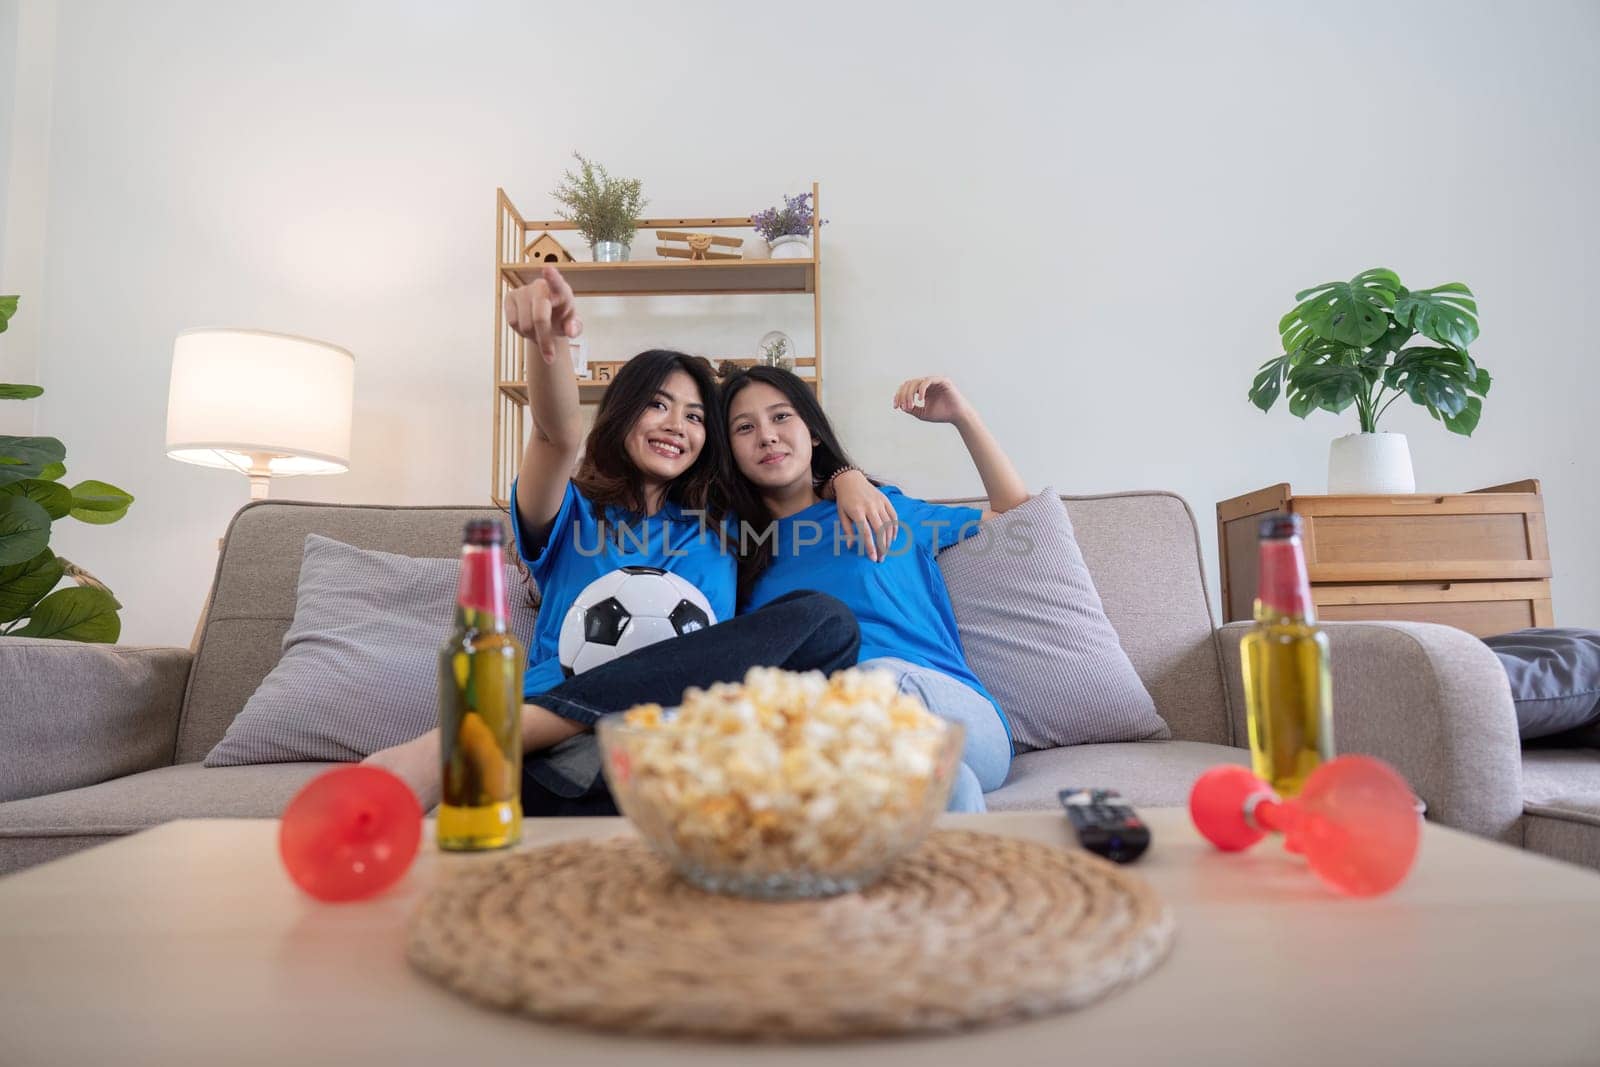 Lesbian couple cheering for Euro football at home with drinks and popcorn. Concept of LGBTQ pride, sports enthusiasm, and celebration by nateemee